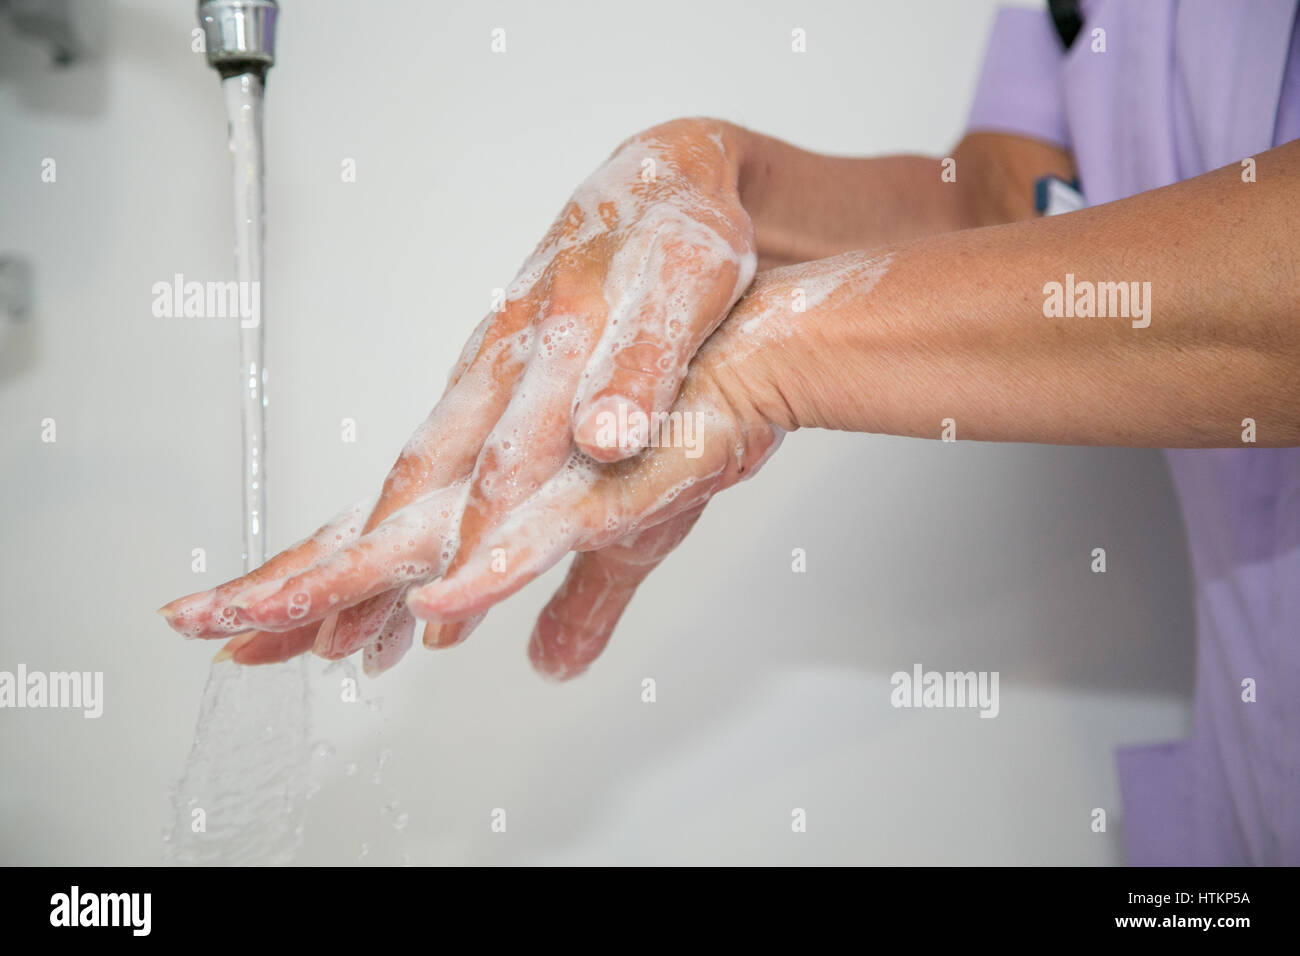 Washing hands with soapy water in clinical setting Stock Photo